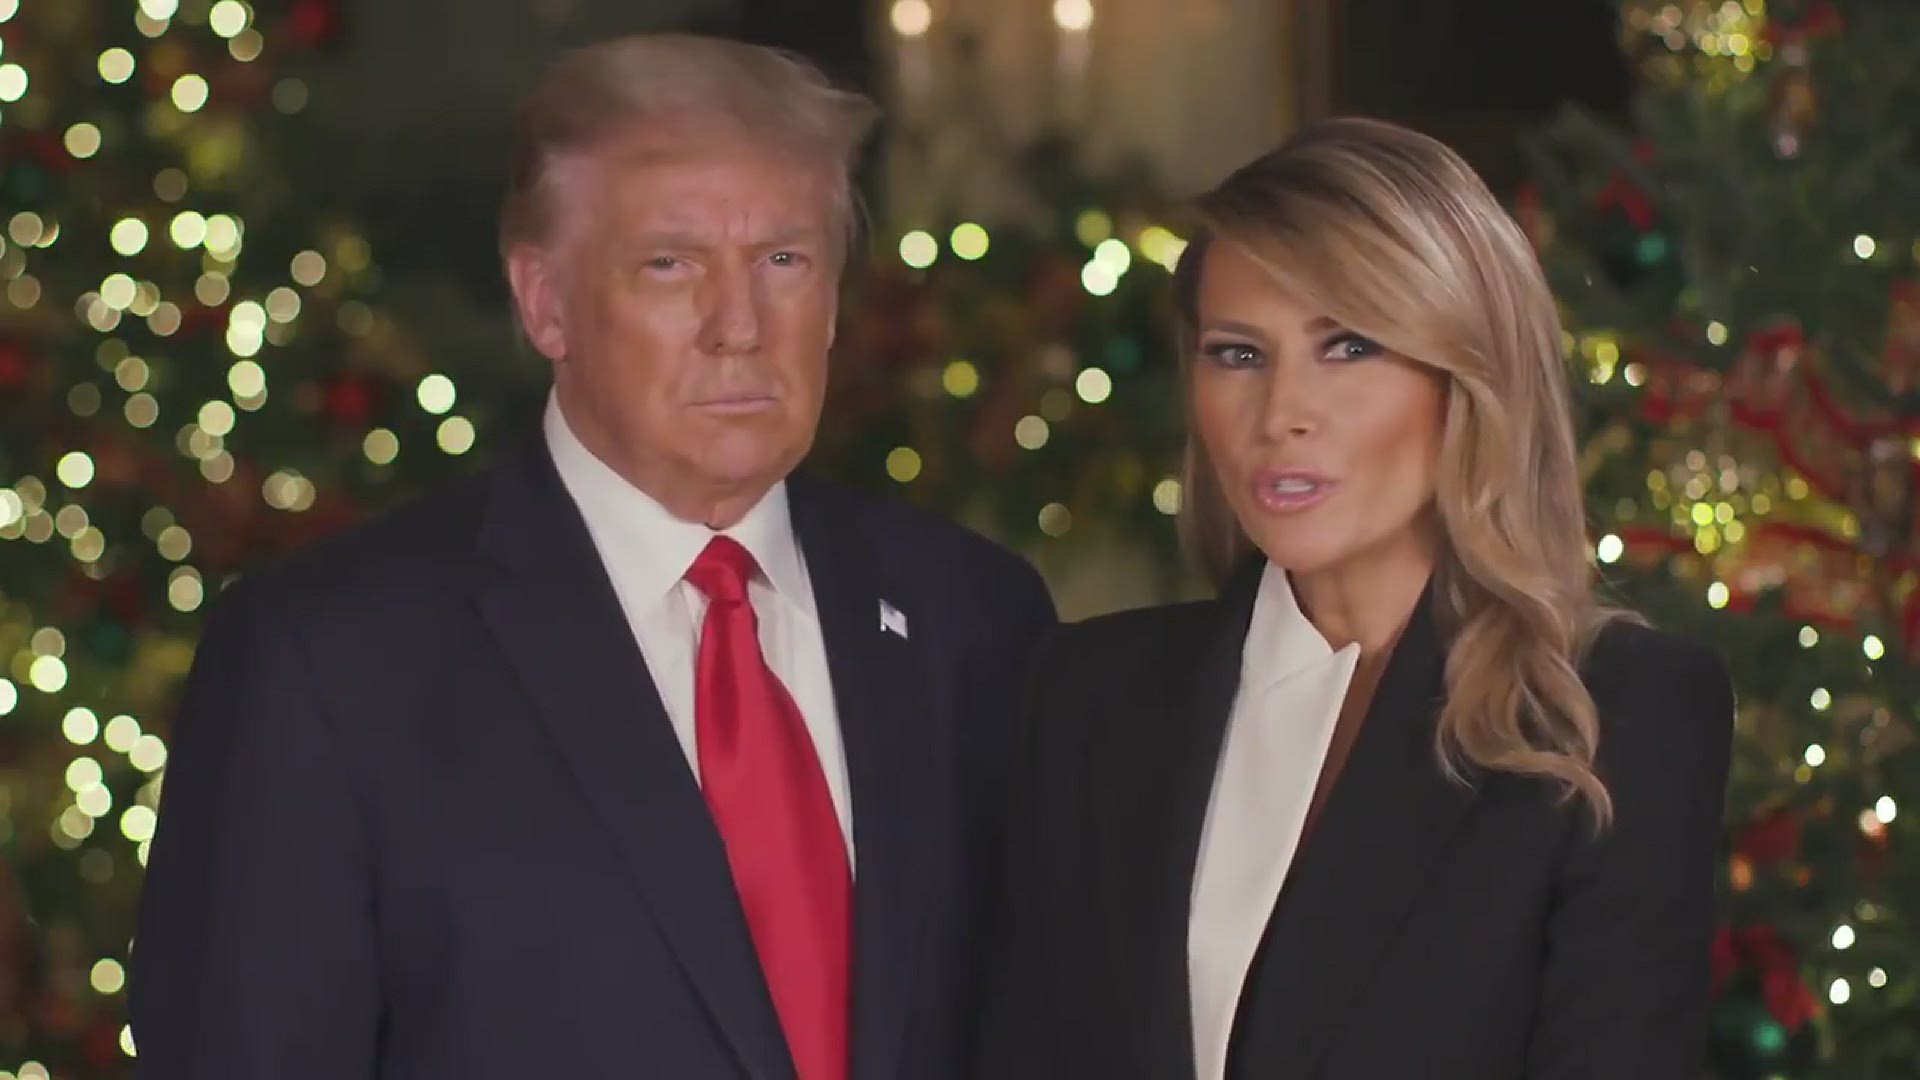 In the video, the president recounts the story of Christmas and he heralds the development of a coronavirus vaccine as a "Christmas miracle."